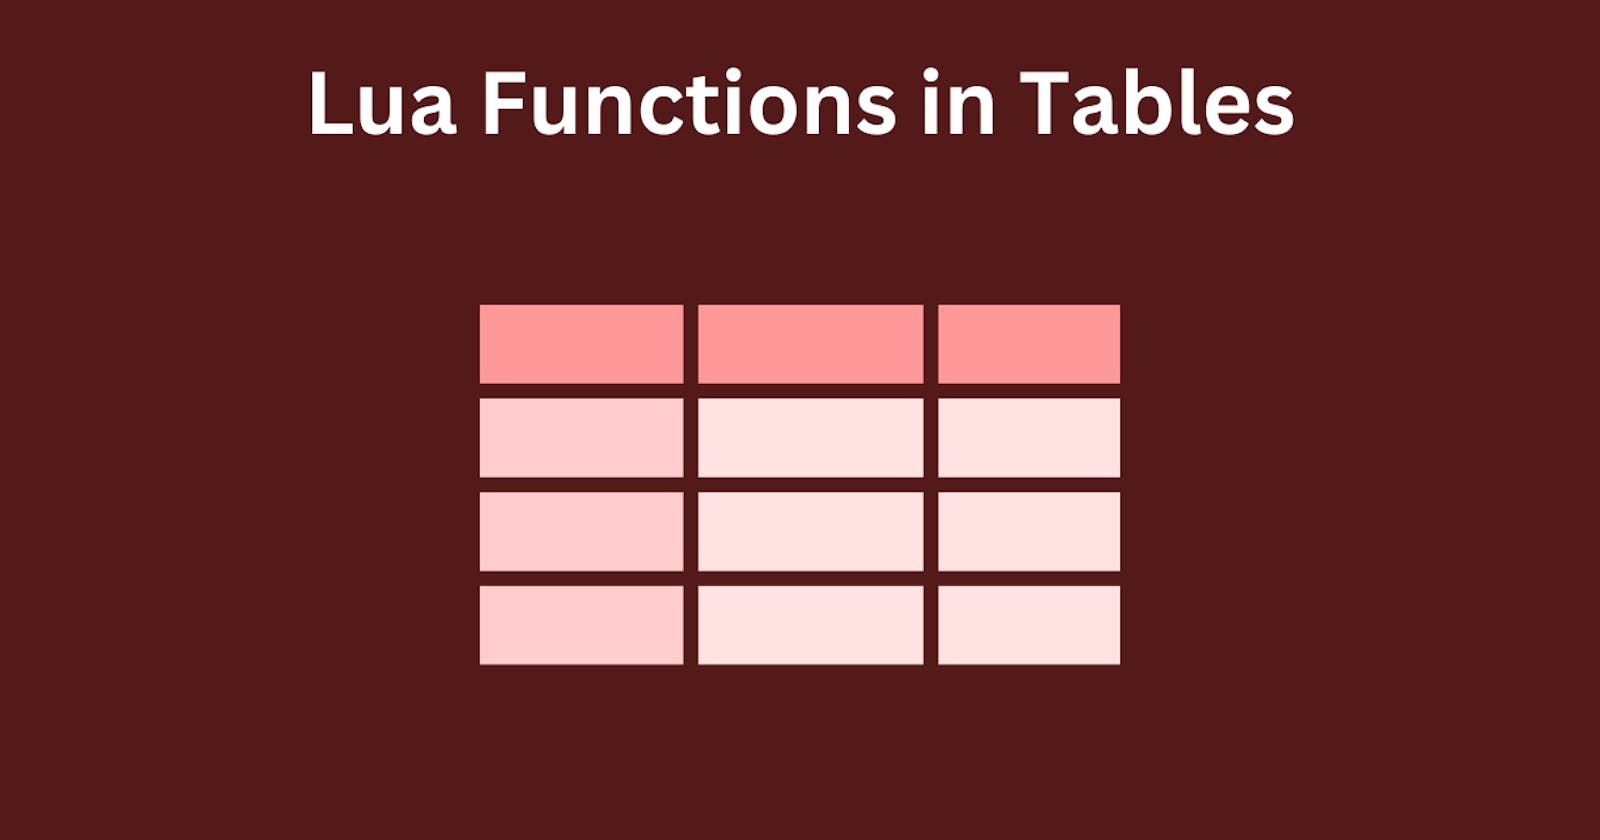 Lua Functions in Tables